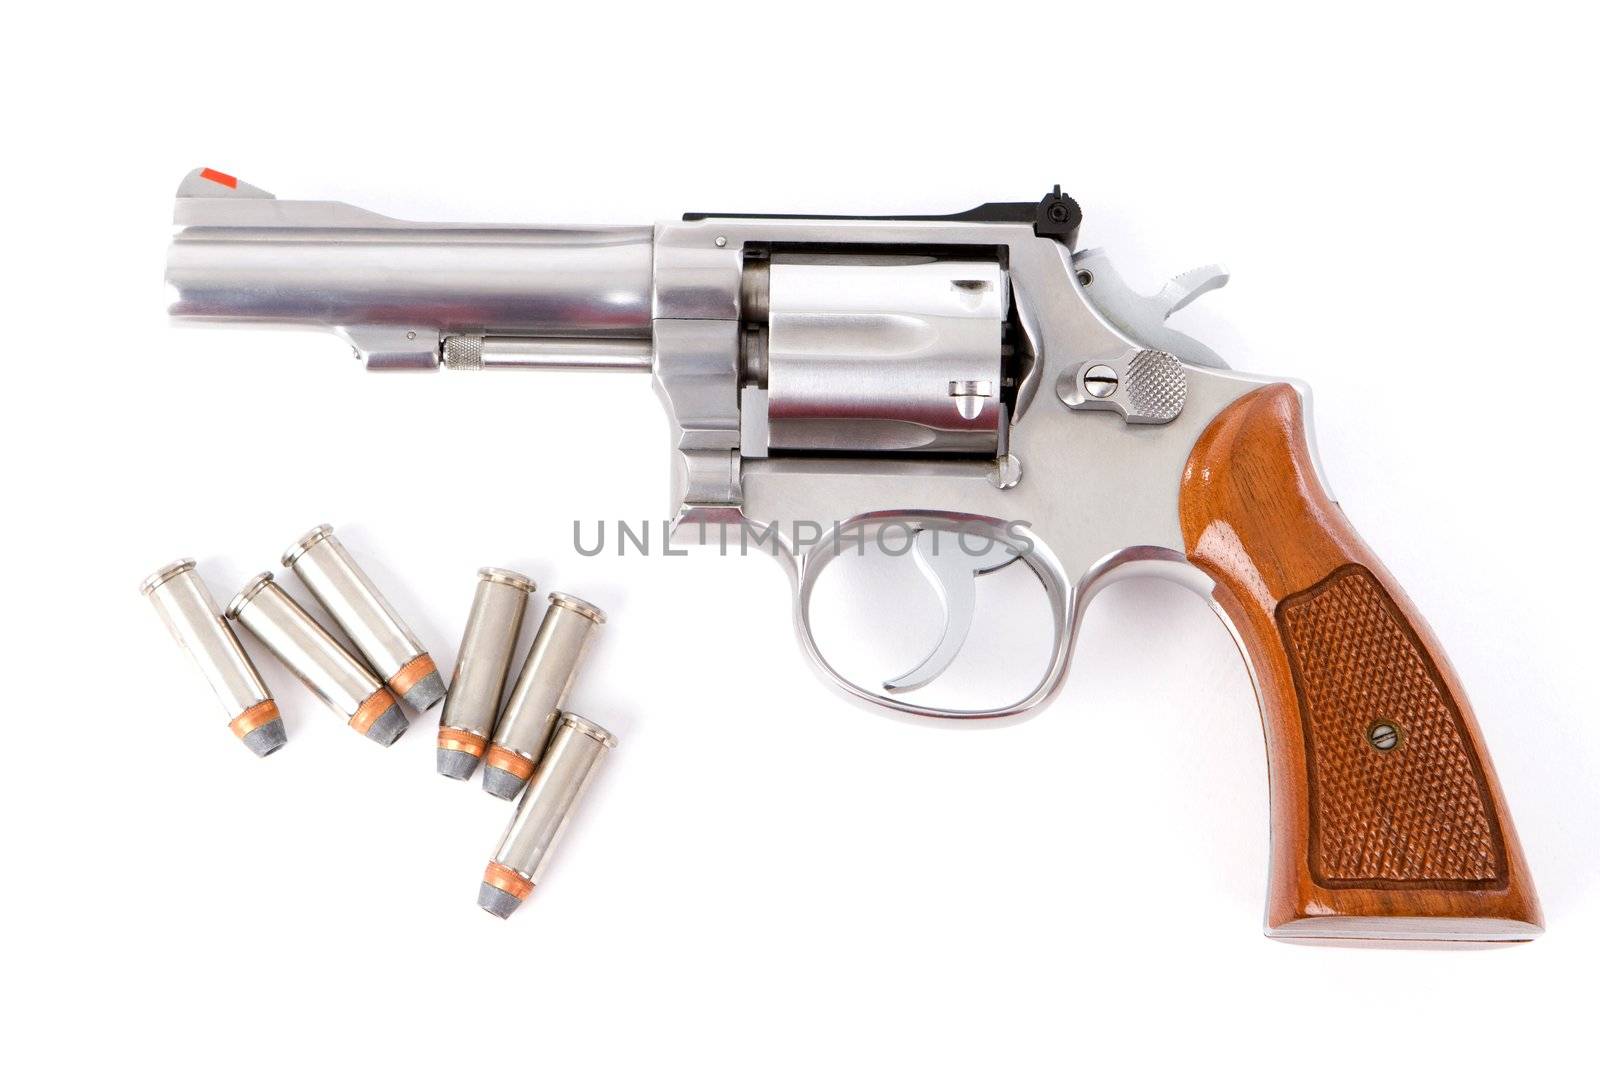 A chrome .38 police special revolver handgun with six hollow point bullets on a white background.